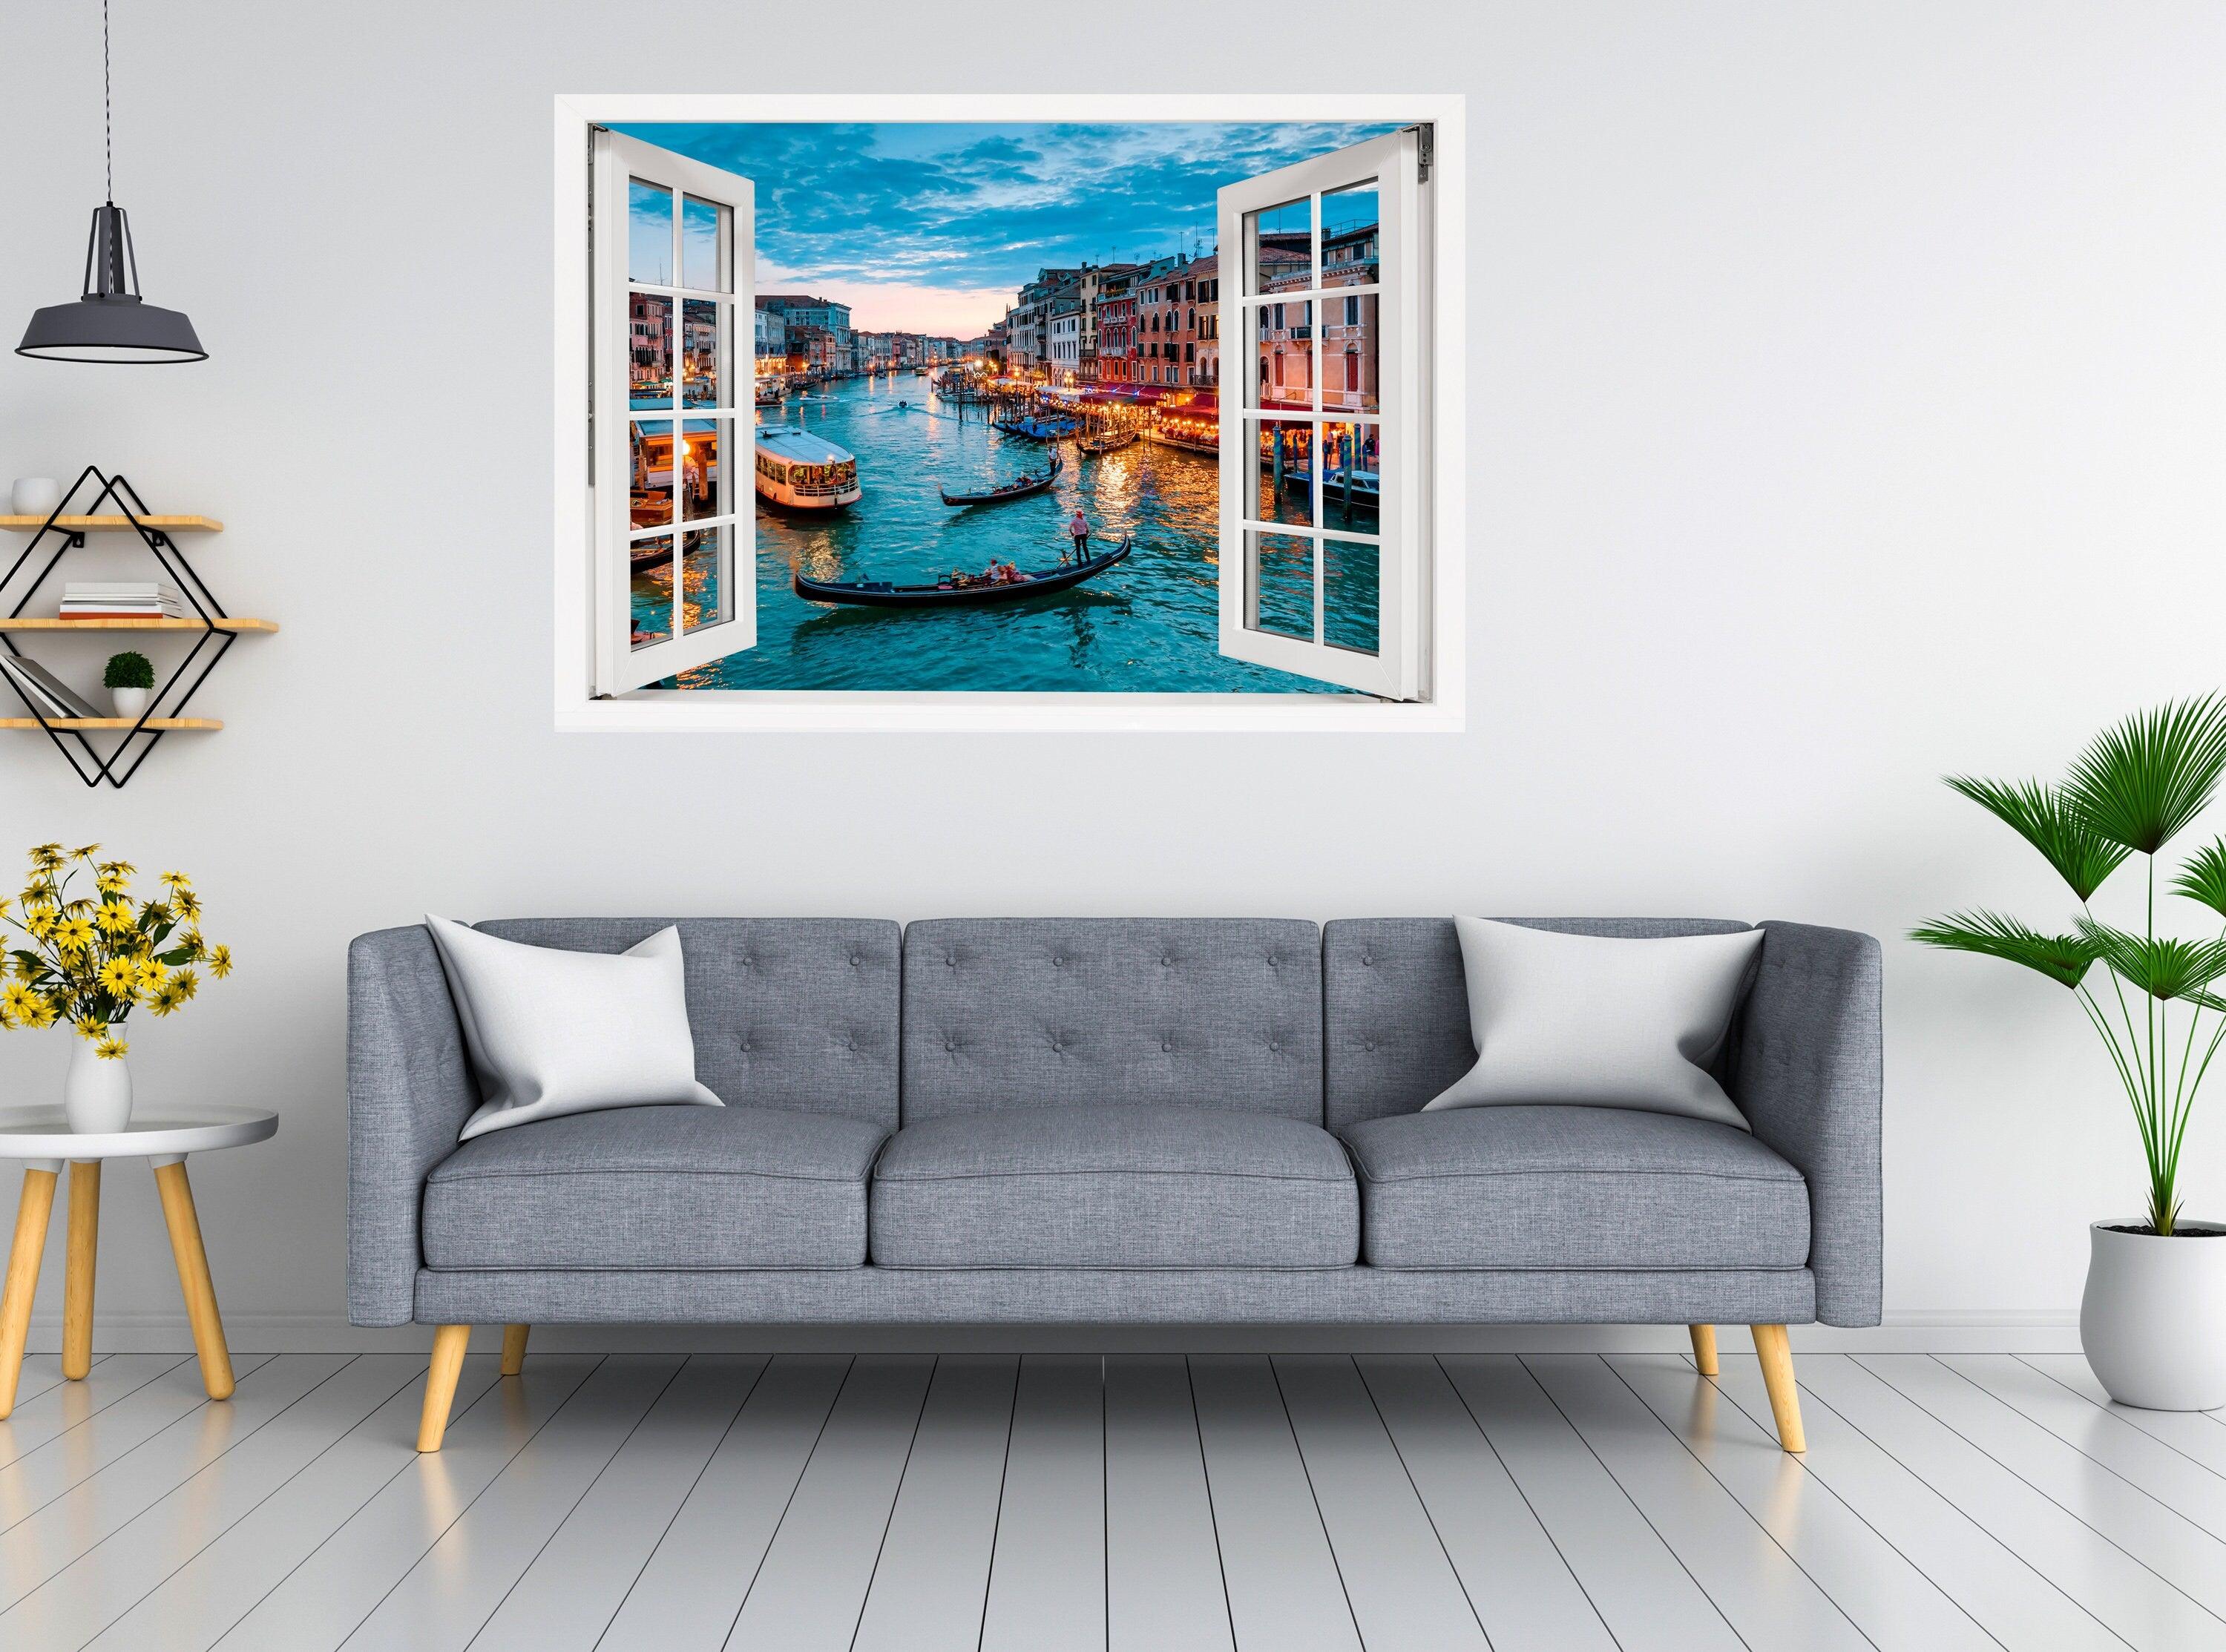 Window Scape Venice and Gondolas #18, Window Decal, Sticker Sunset, Removable, Fabric, Window Frame, Office,Bedroom, 3D